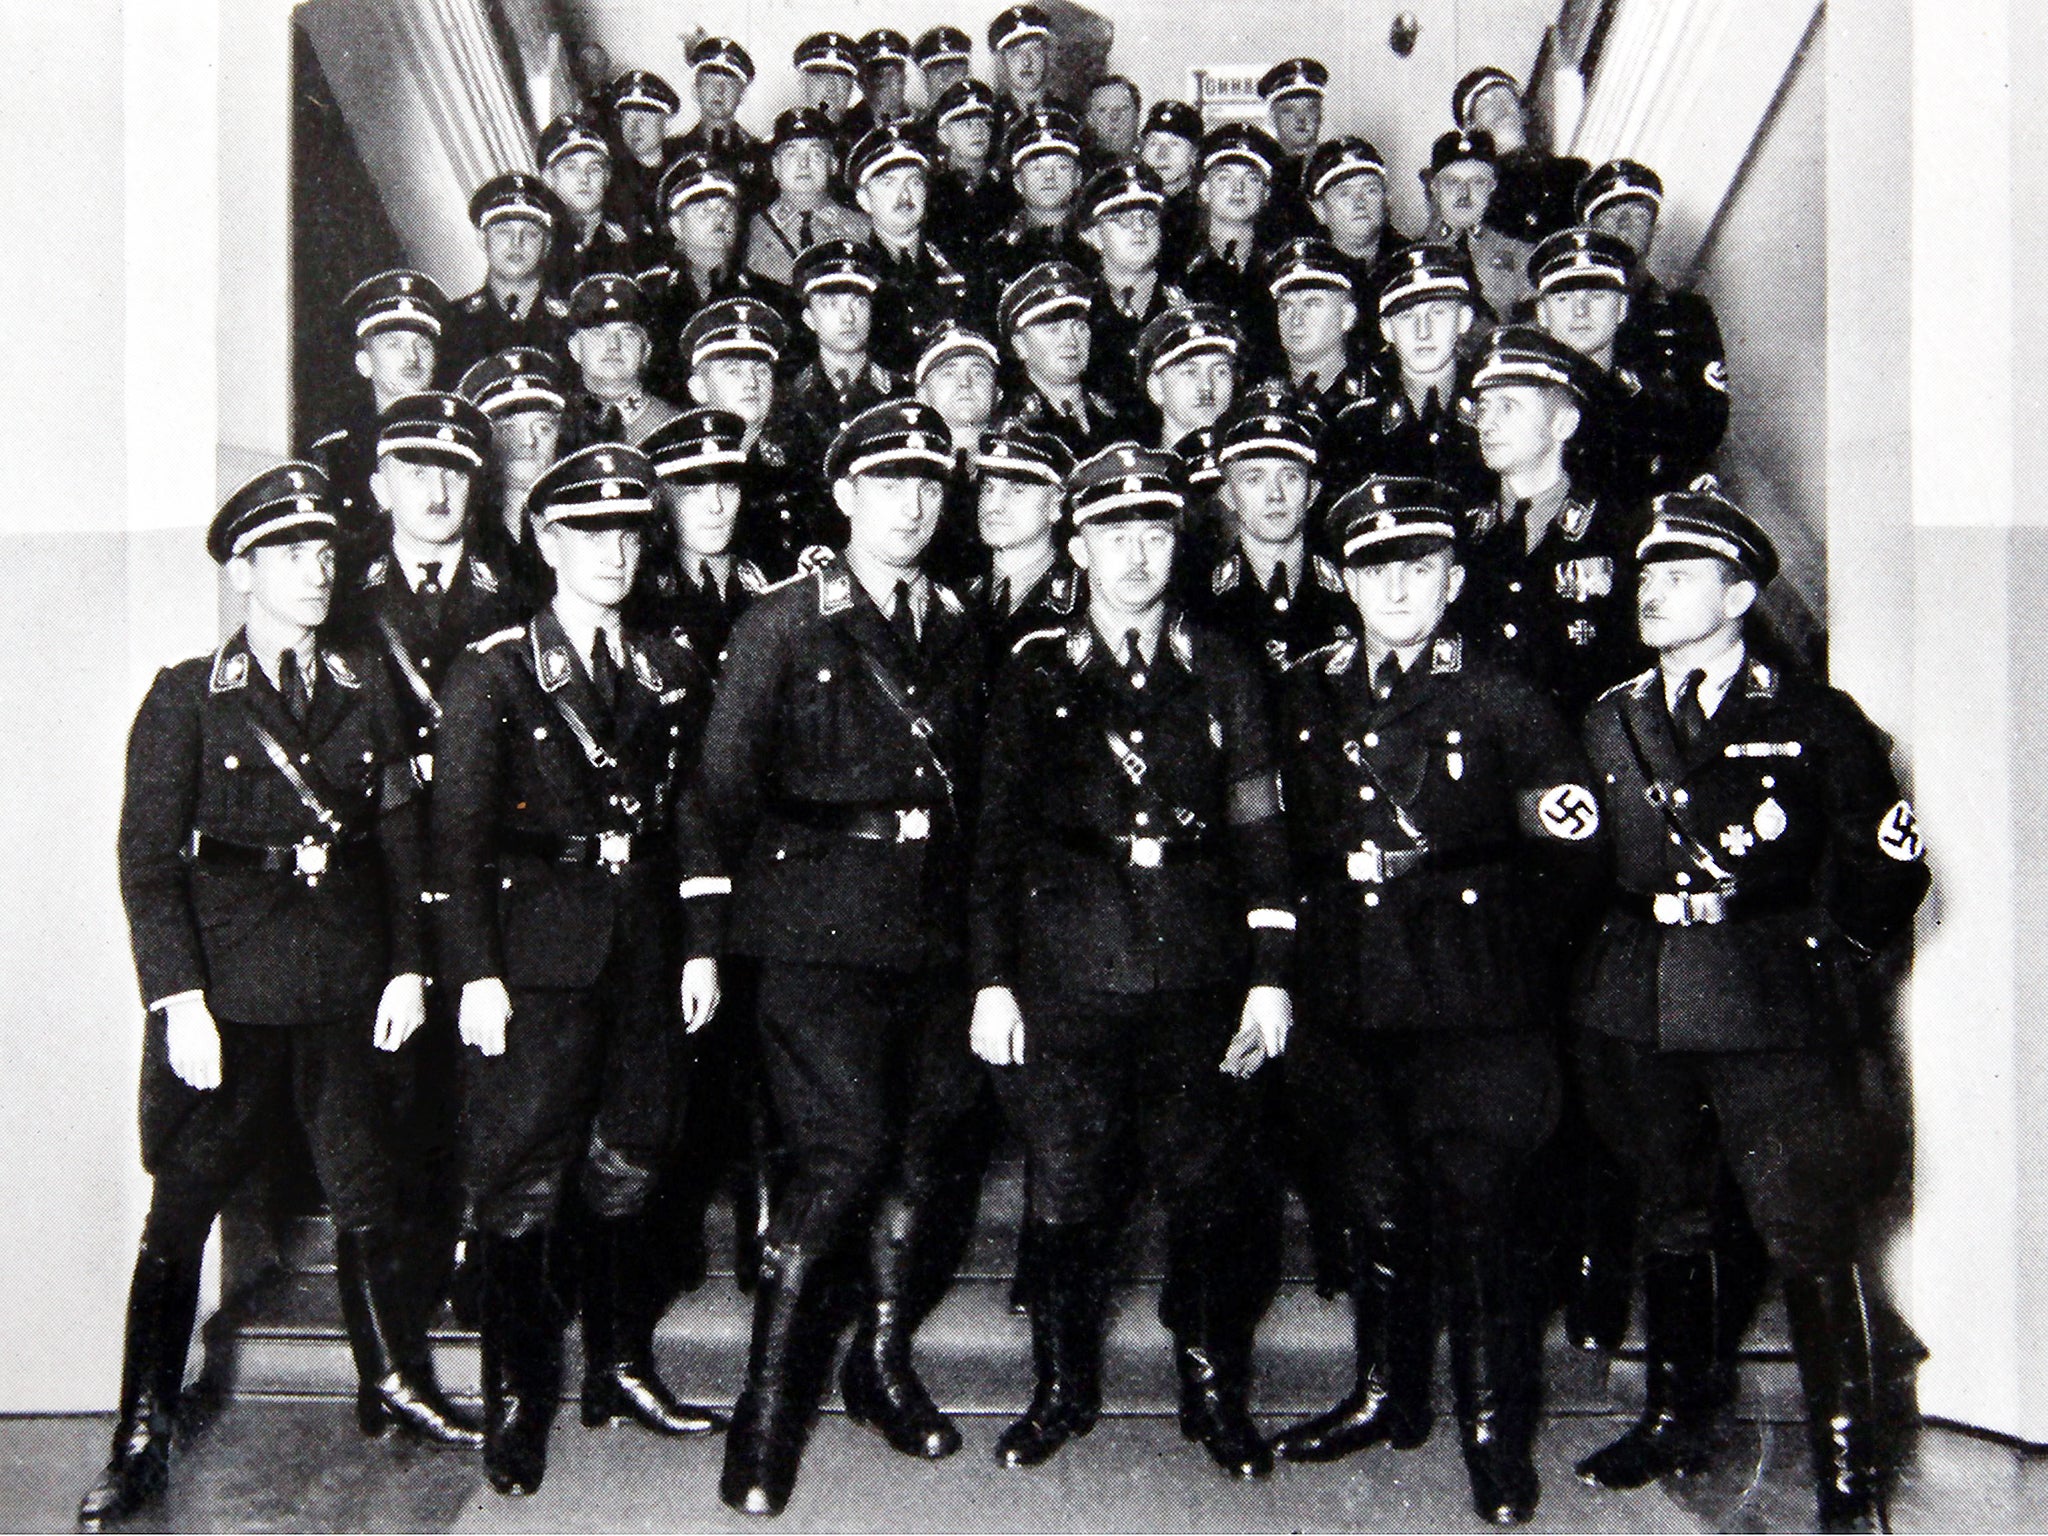 Heinrich Himmler (front row, centre, with glasses) with fellow SS men – his daughter wasn't the only one linked to him to find their way into Germany’s postwar intelligence